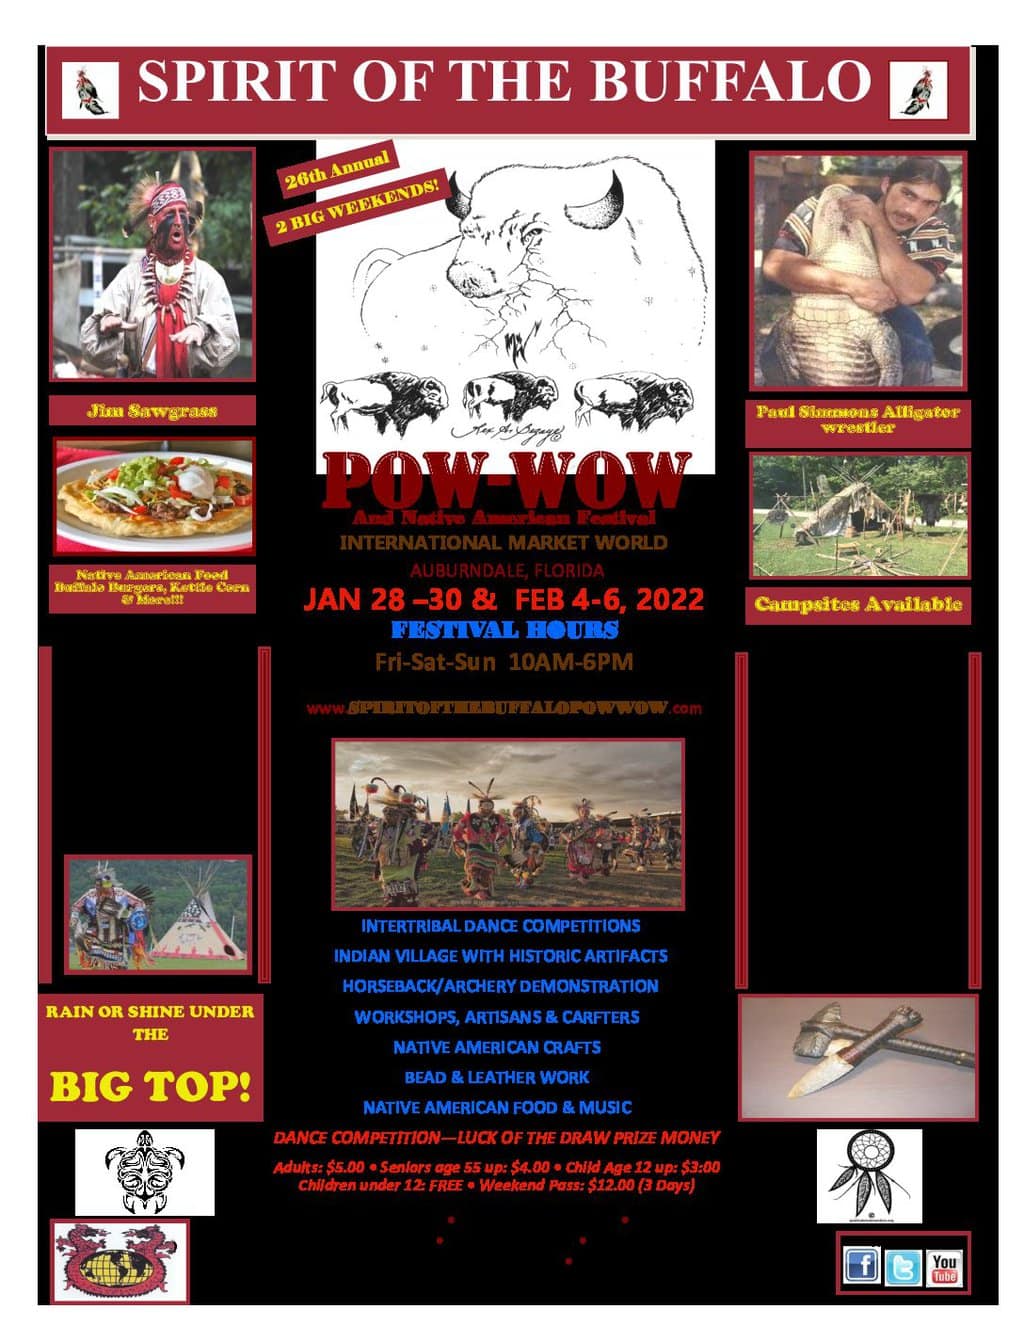 26th Annual Spirit of the Buffalo Pow Wow 2022 - 2 weekend event